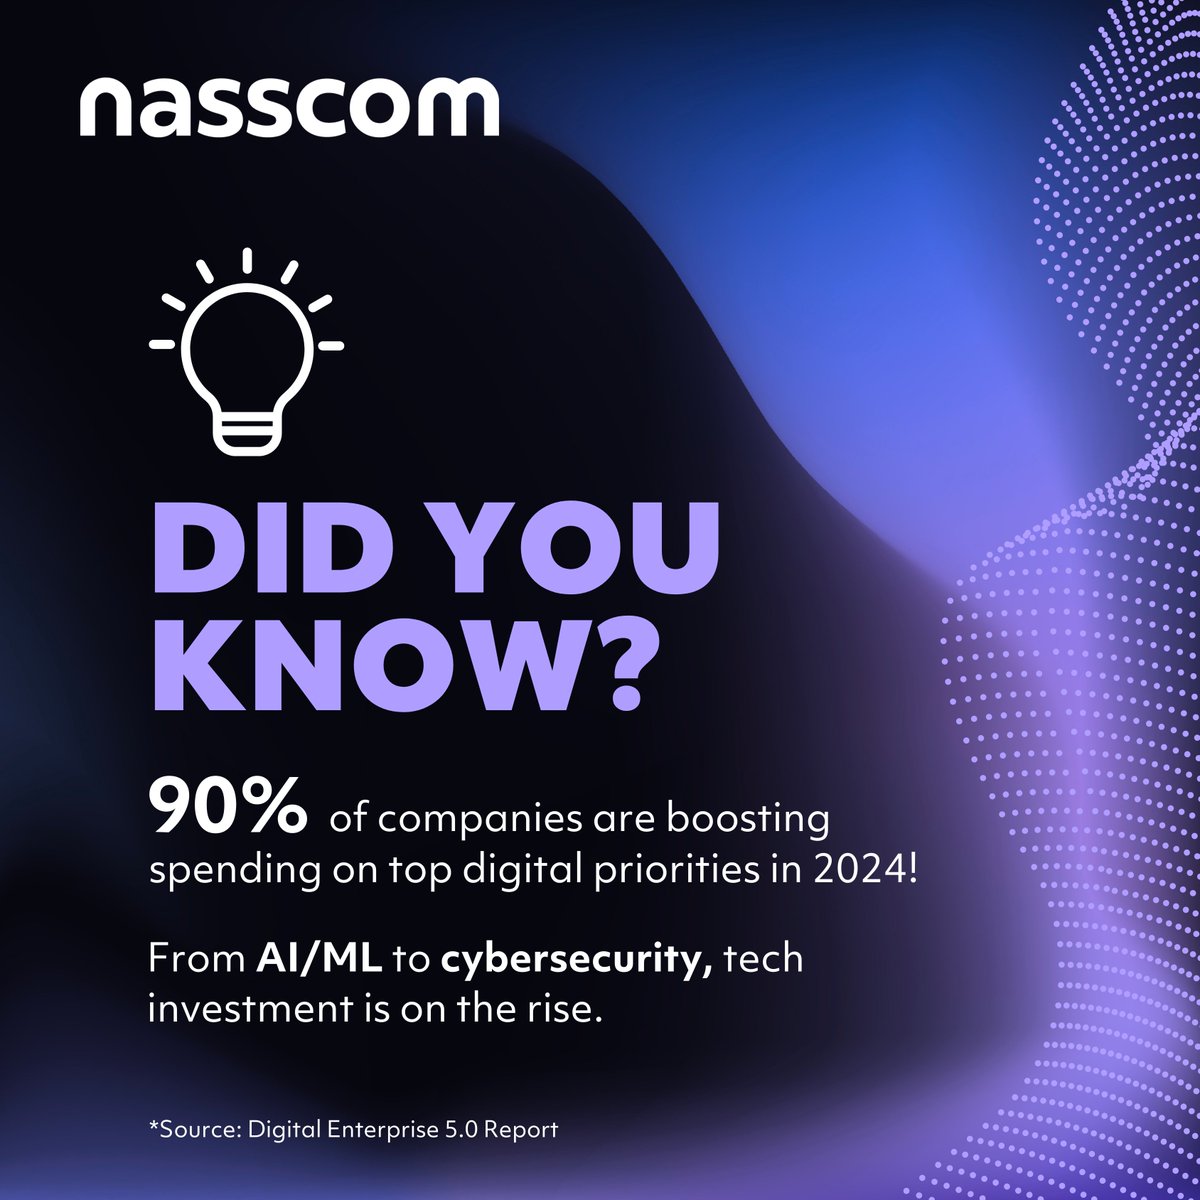 Big moves ahead in tech spending! With a surge in investments focusing on Gen AI, intelligent automation, and big data analytics, companies are gearing up for a transformative digital journey. Know more about India’s digital tech landscape: nasscom.in/system/files/p…